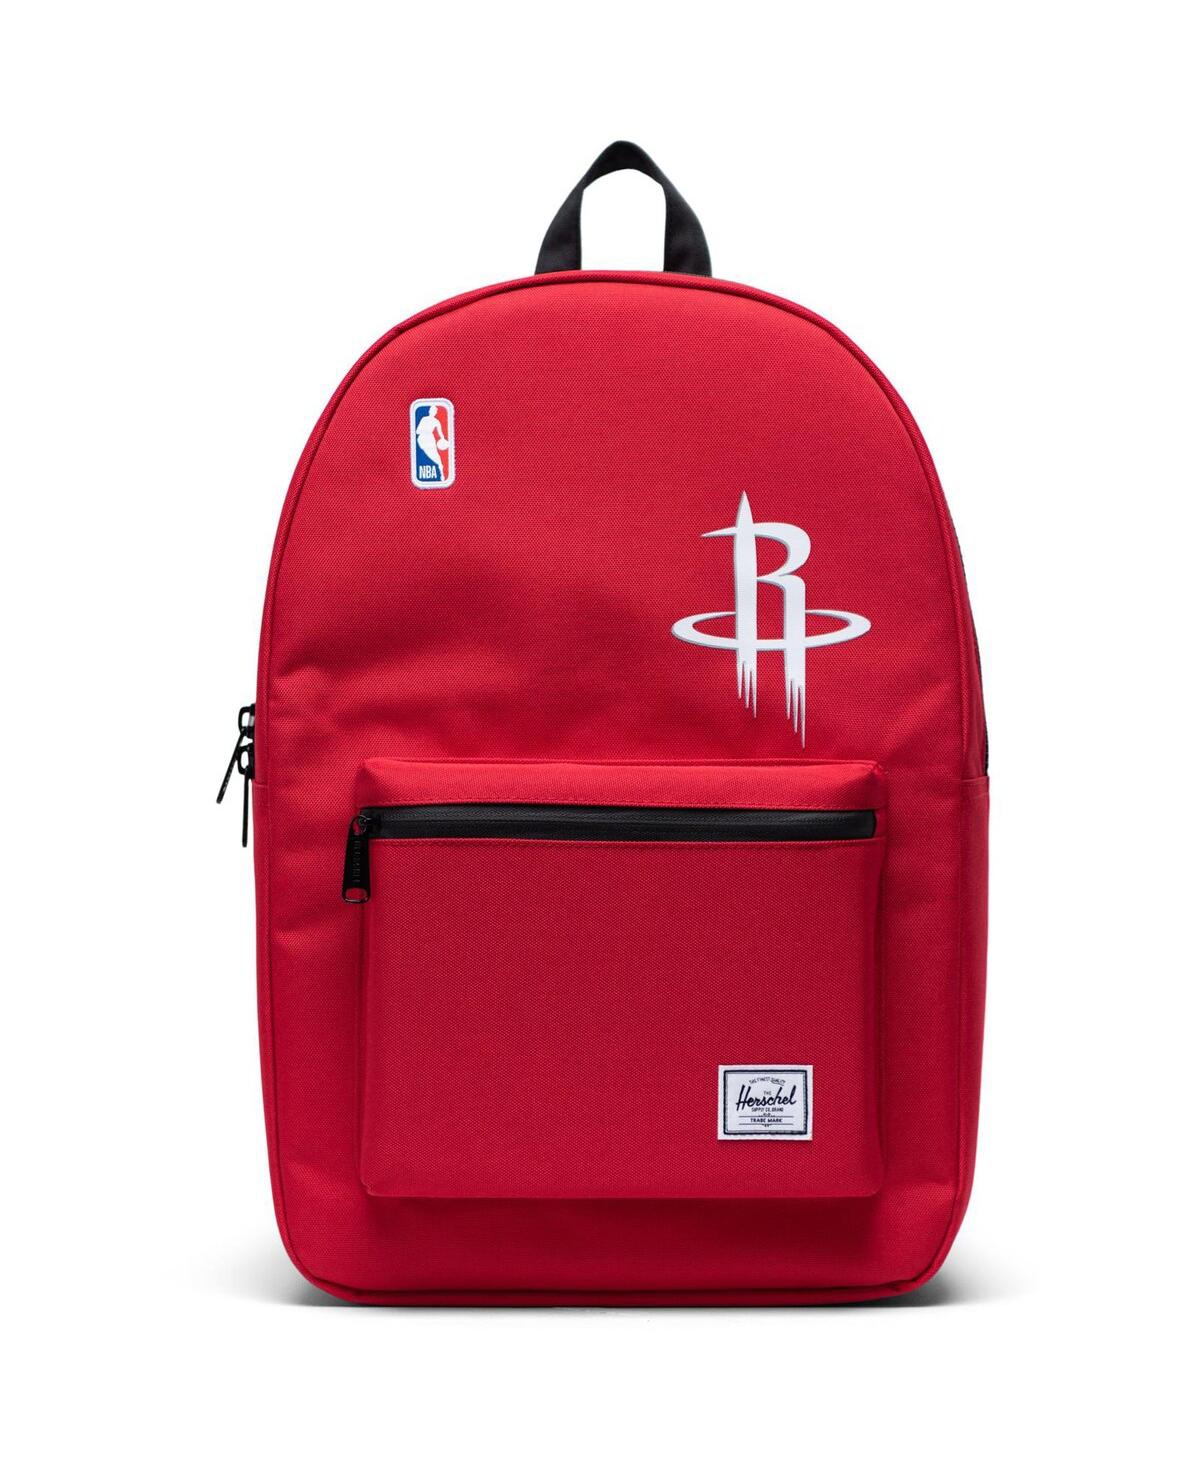 Supply Co. Houston Rockets Statement Backpack - Red